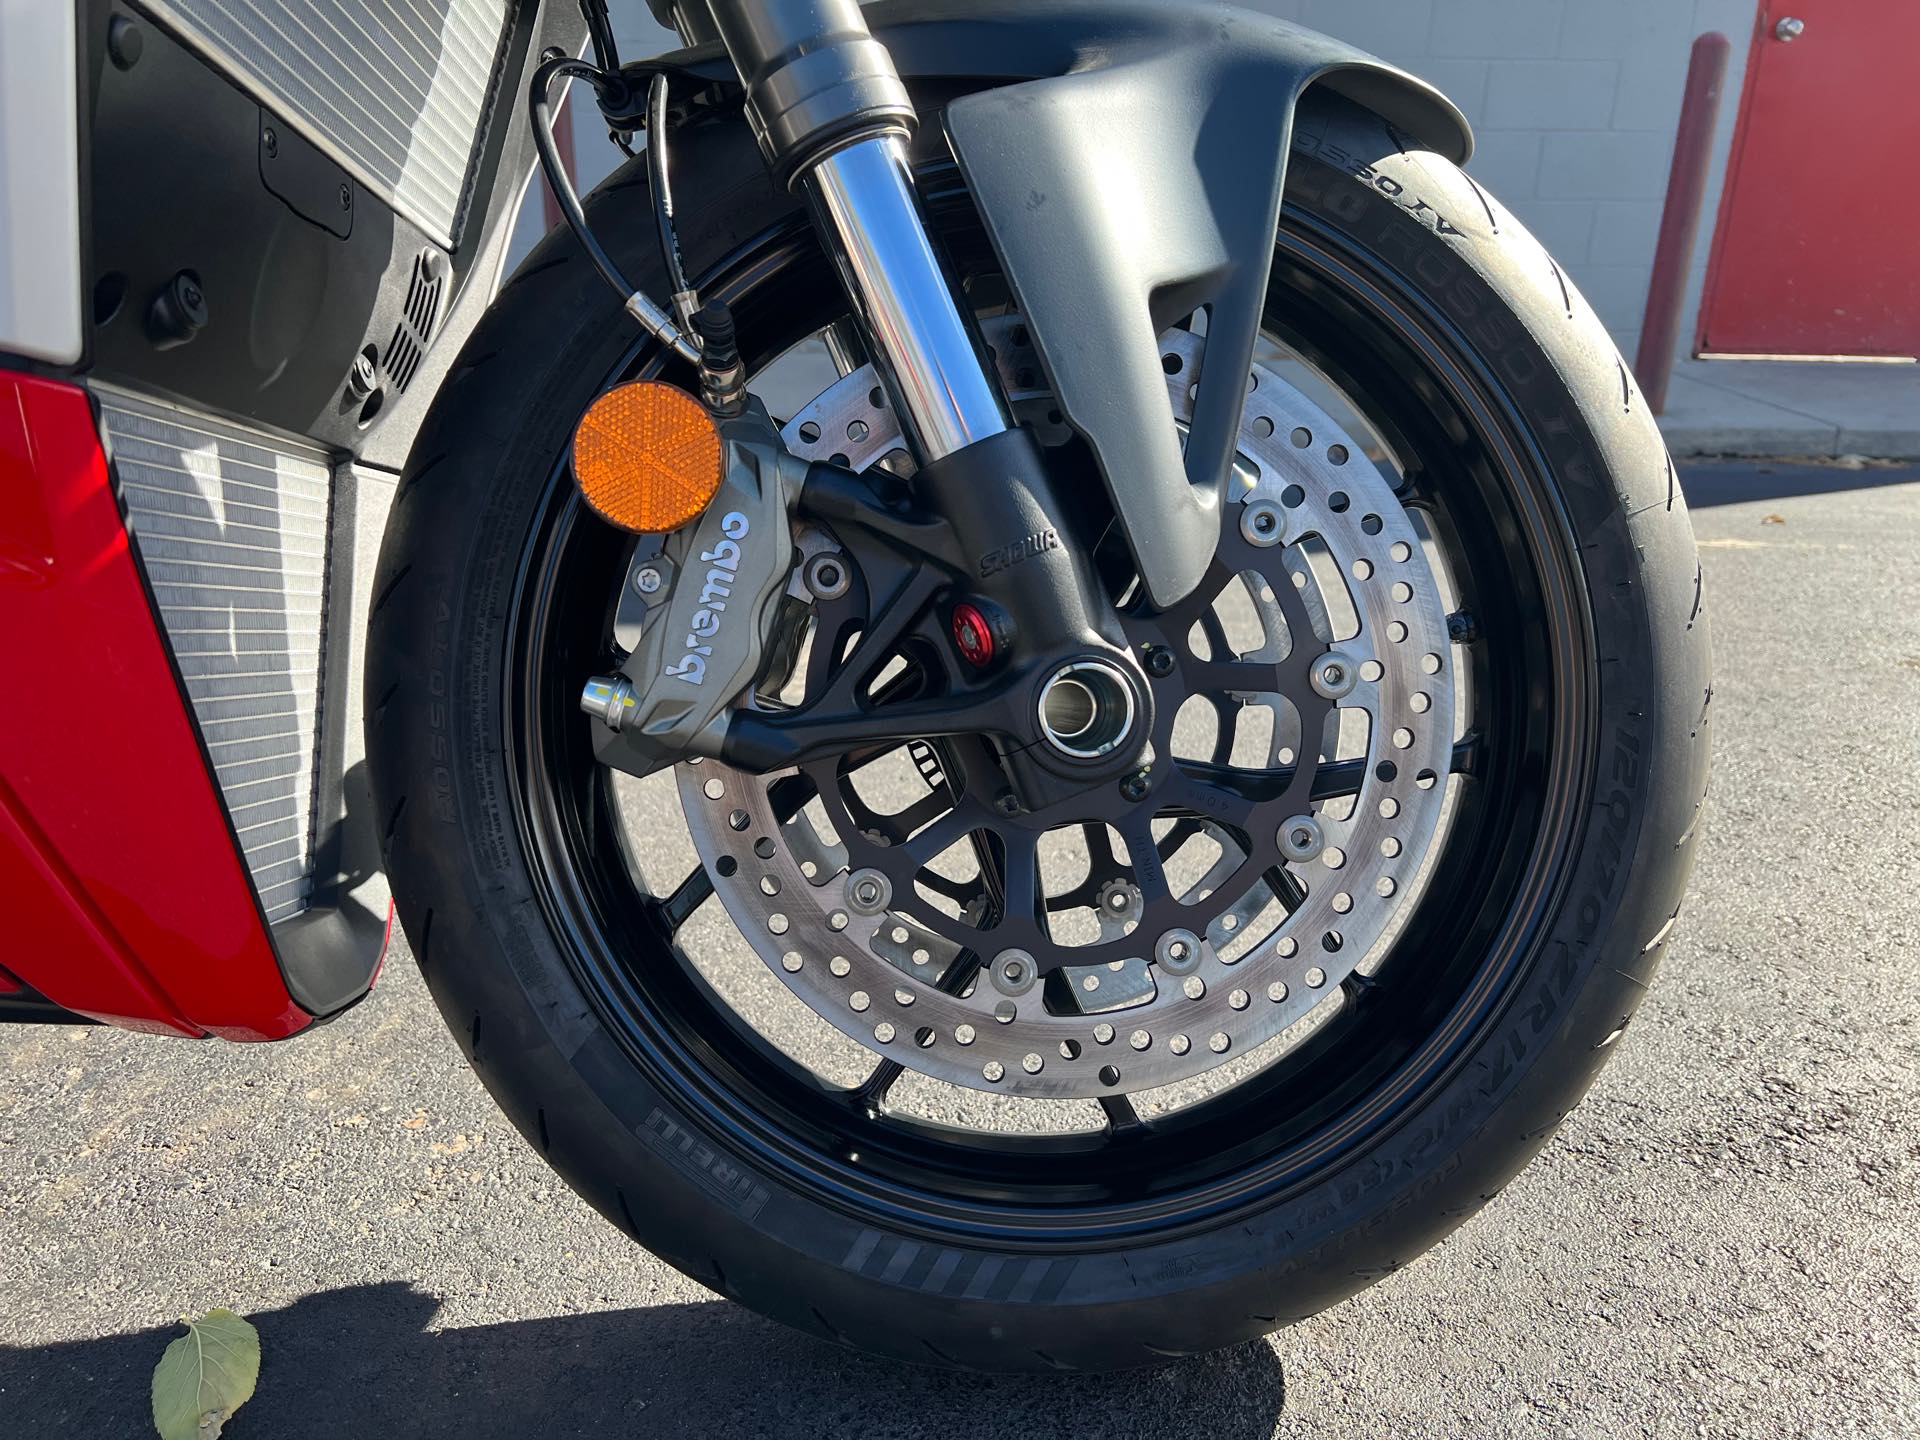 2023 Ducati Streetfighter V2 at Aces Motorcycles - Fort Collins